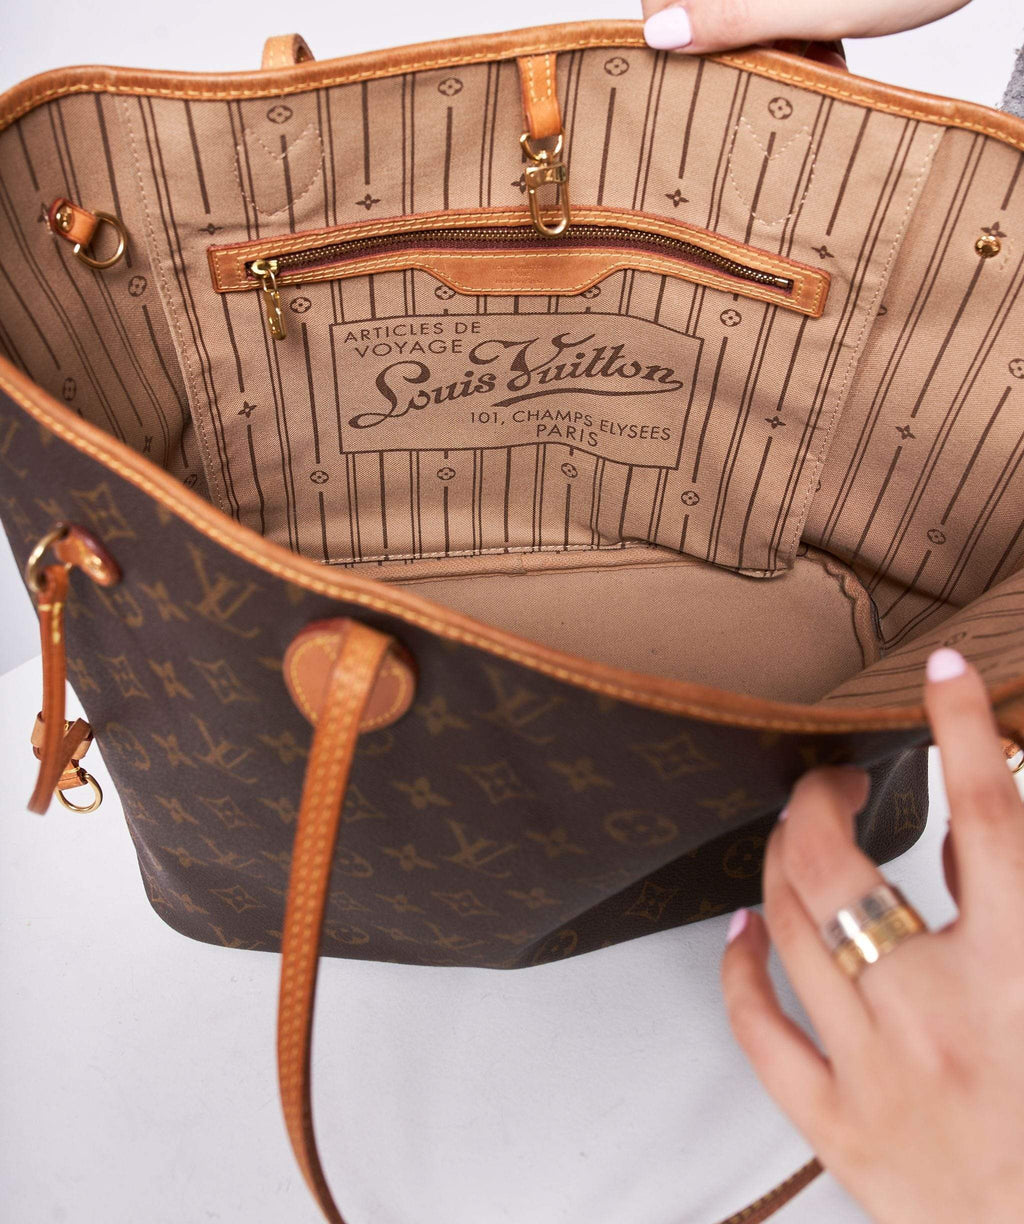 Louis Vuitton 101: The Material Guide - The Vault